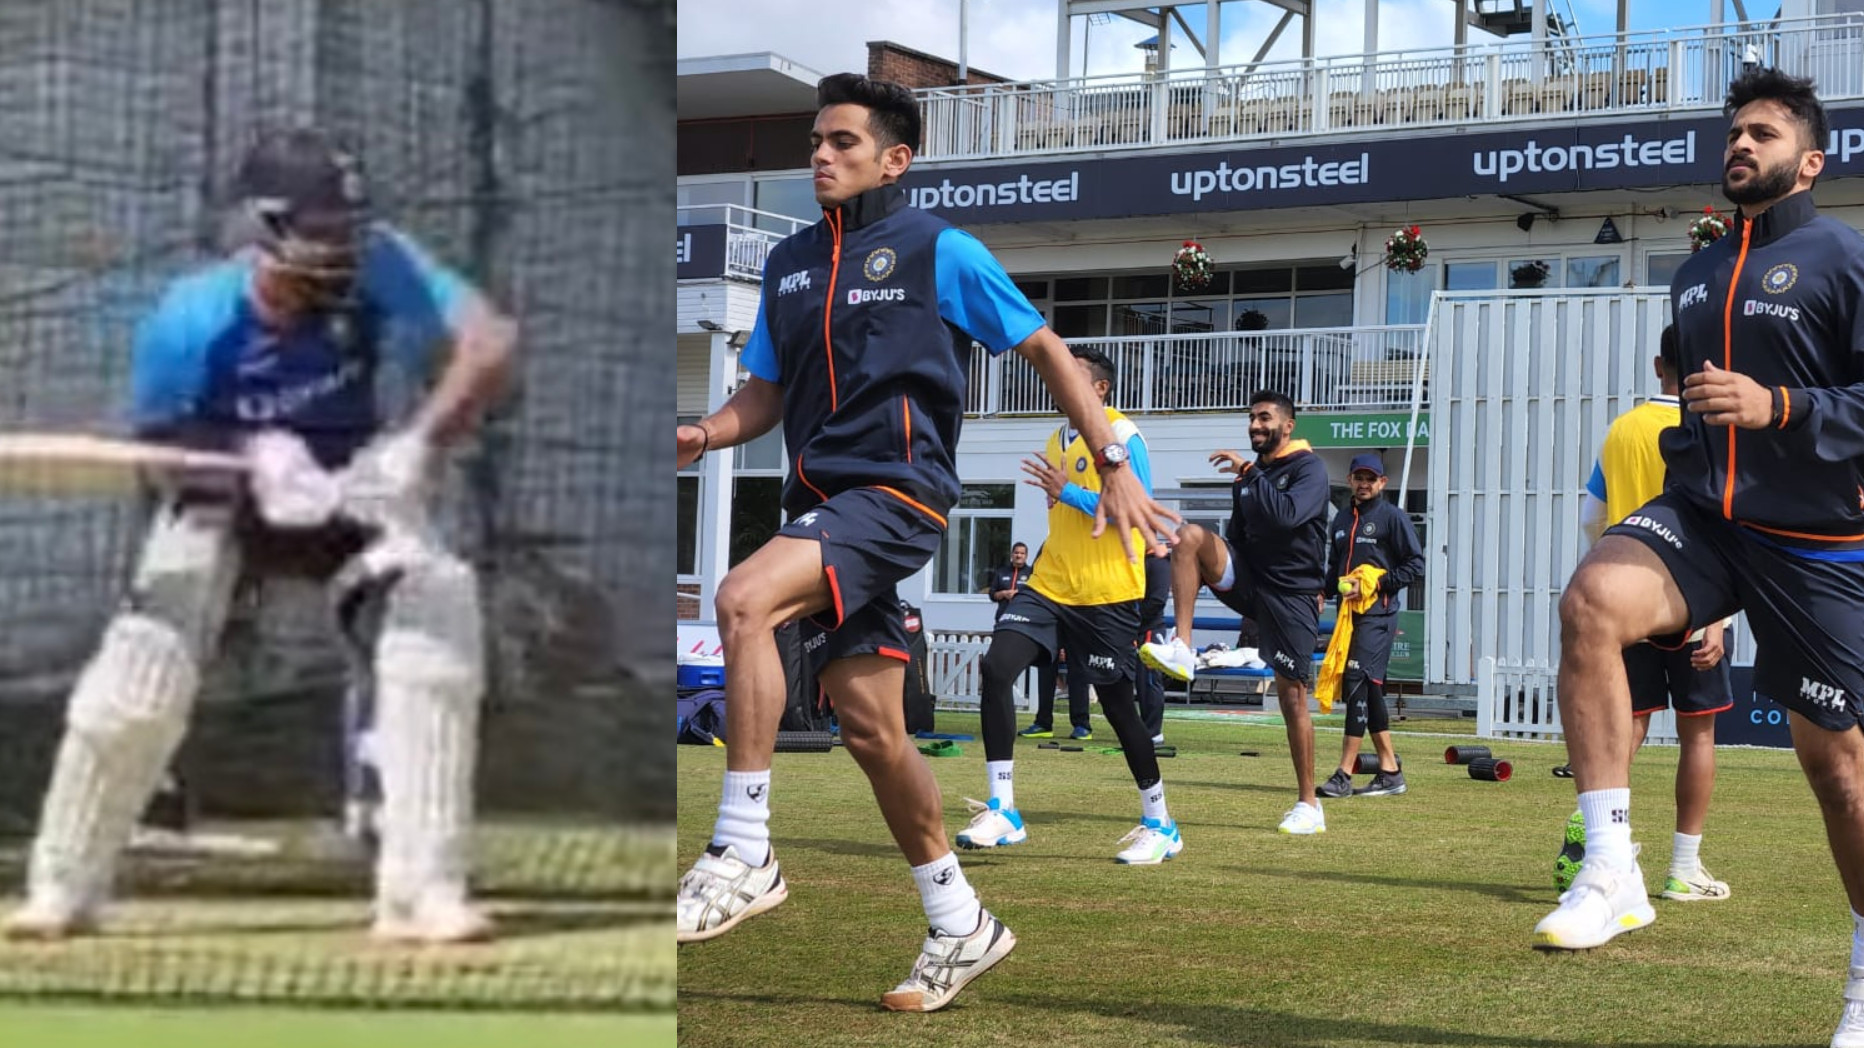 ENG v IND 2022: WATCH- Rohit Sharma bats in nets as Team India shifts training base to Leicester